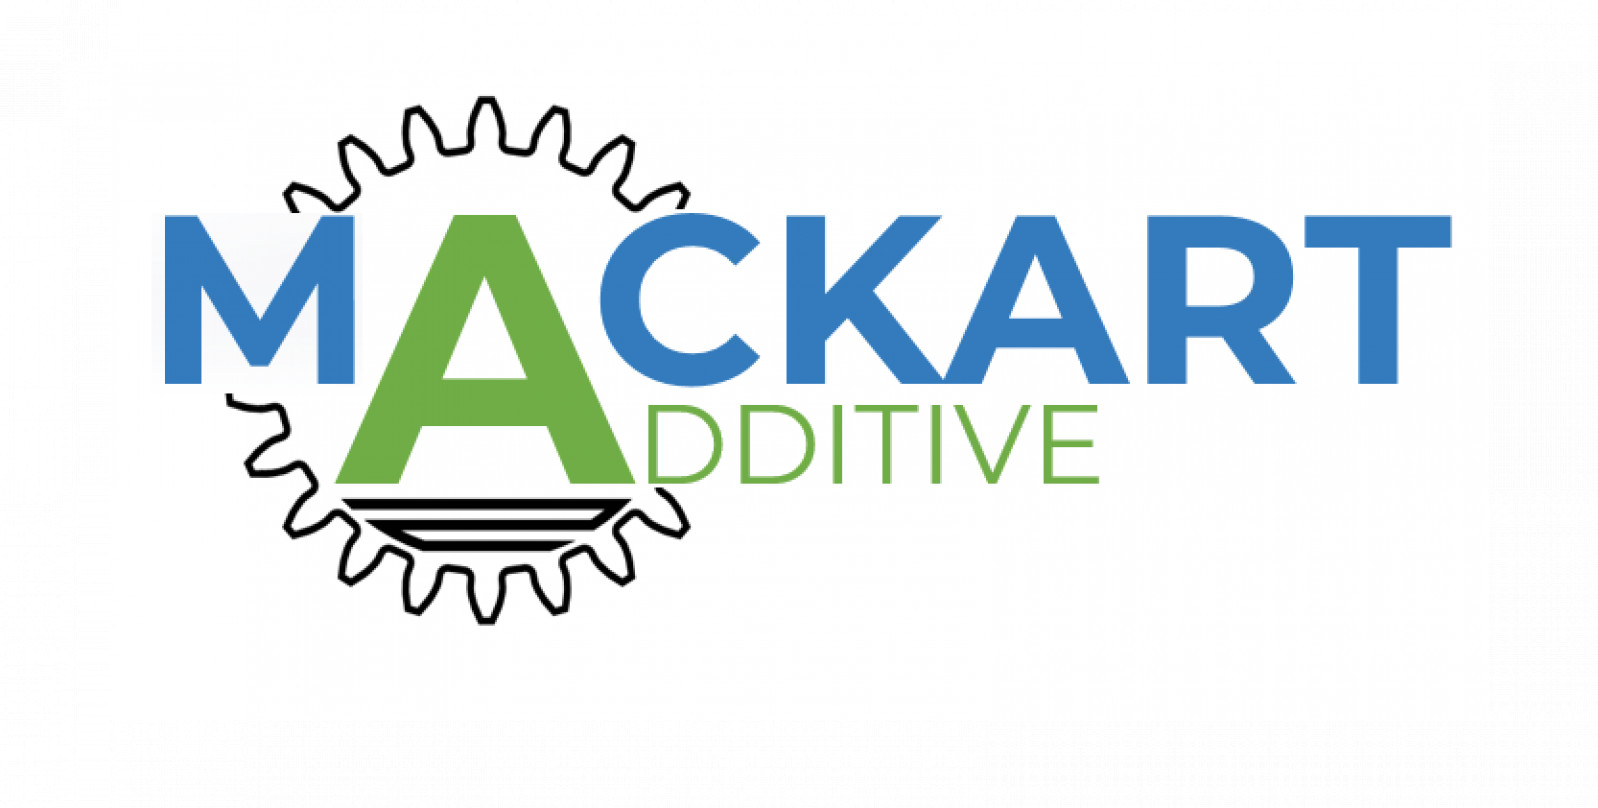 Mackart Additive launches new website completing t...